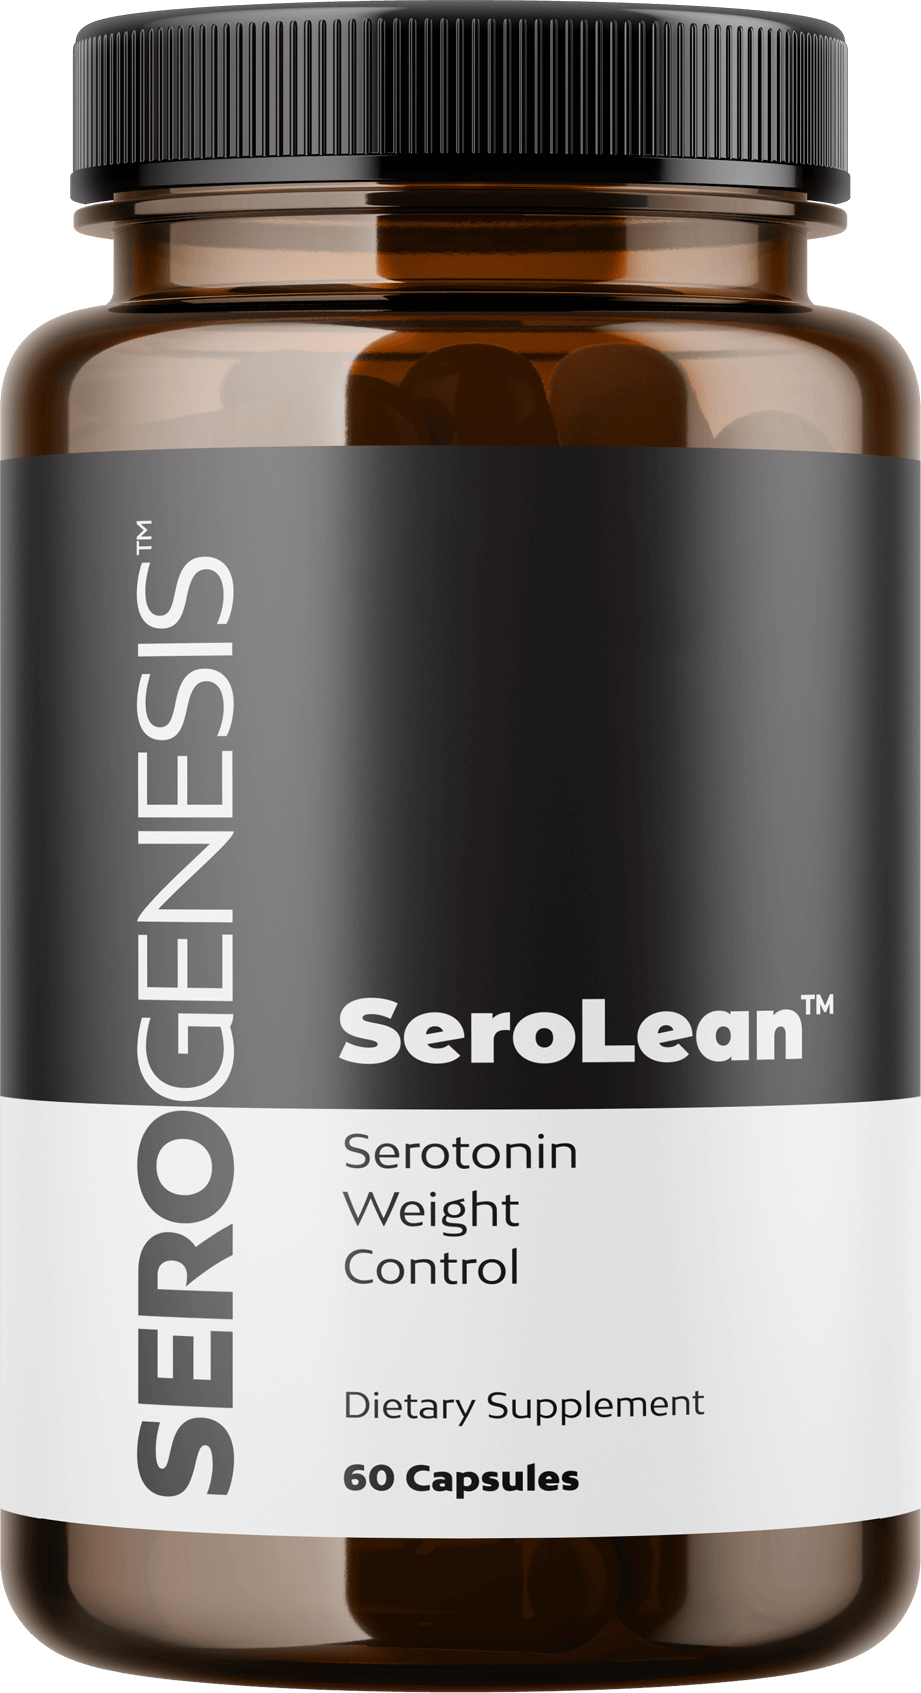 Serolean Carb Craving Reducer Review